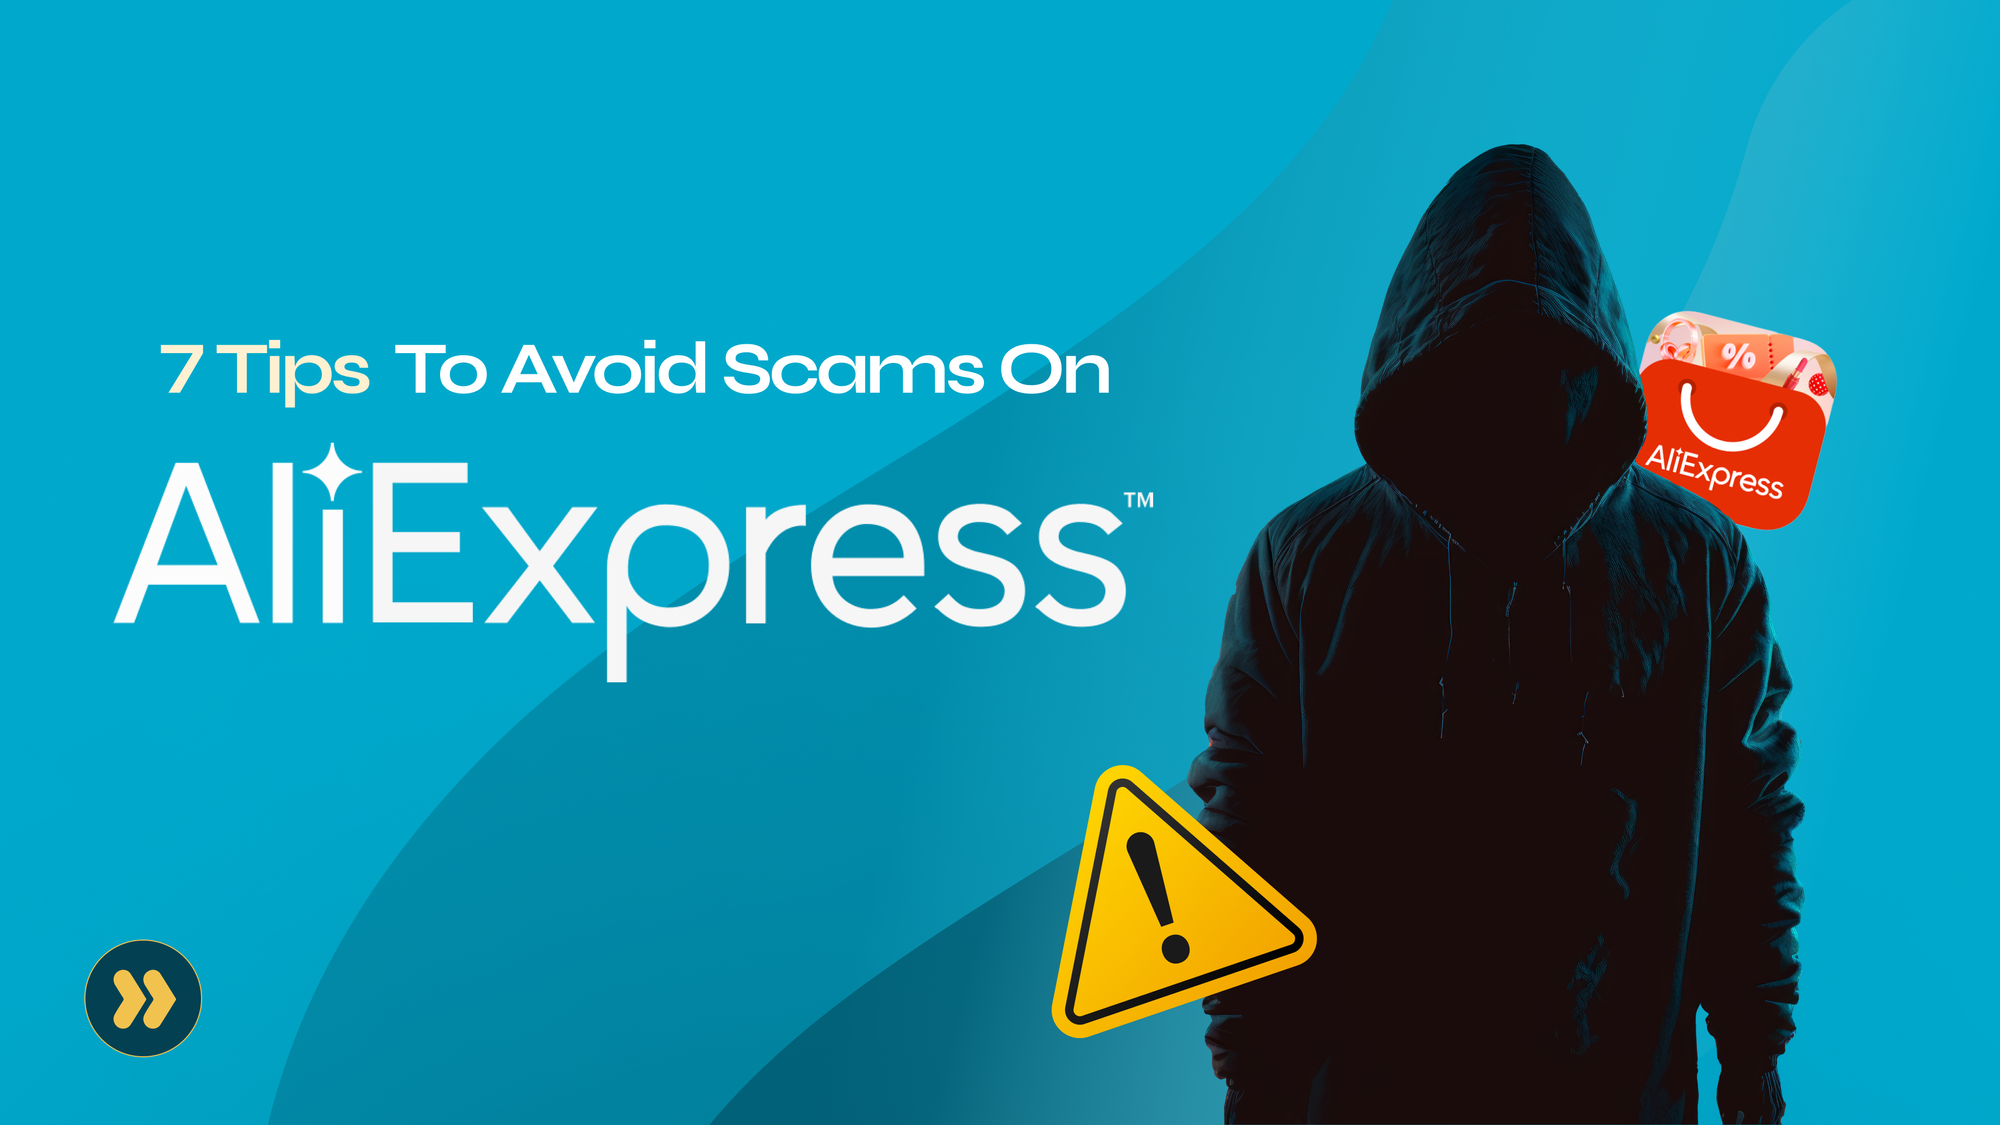 Is AliExpress Safe? 7 Tips to Avoid Scammers and Enjoy Secure Shopping